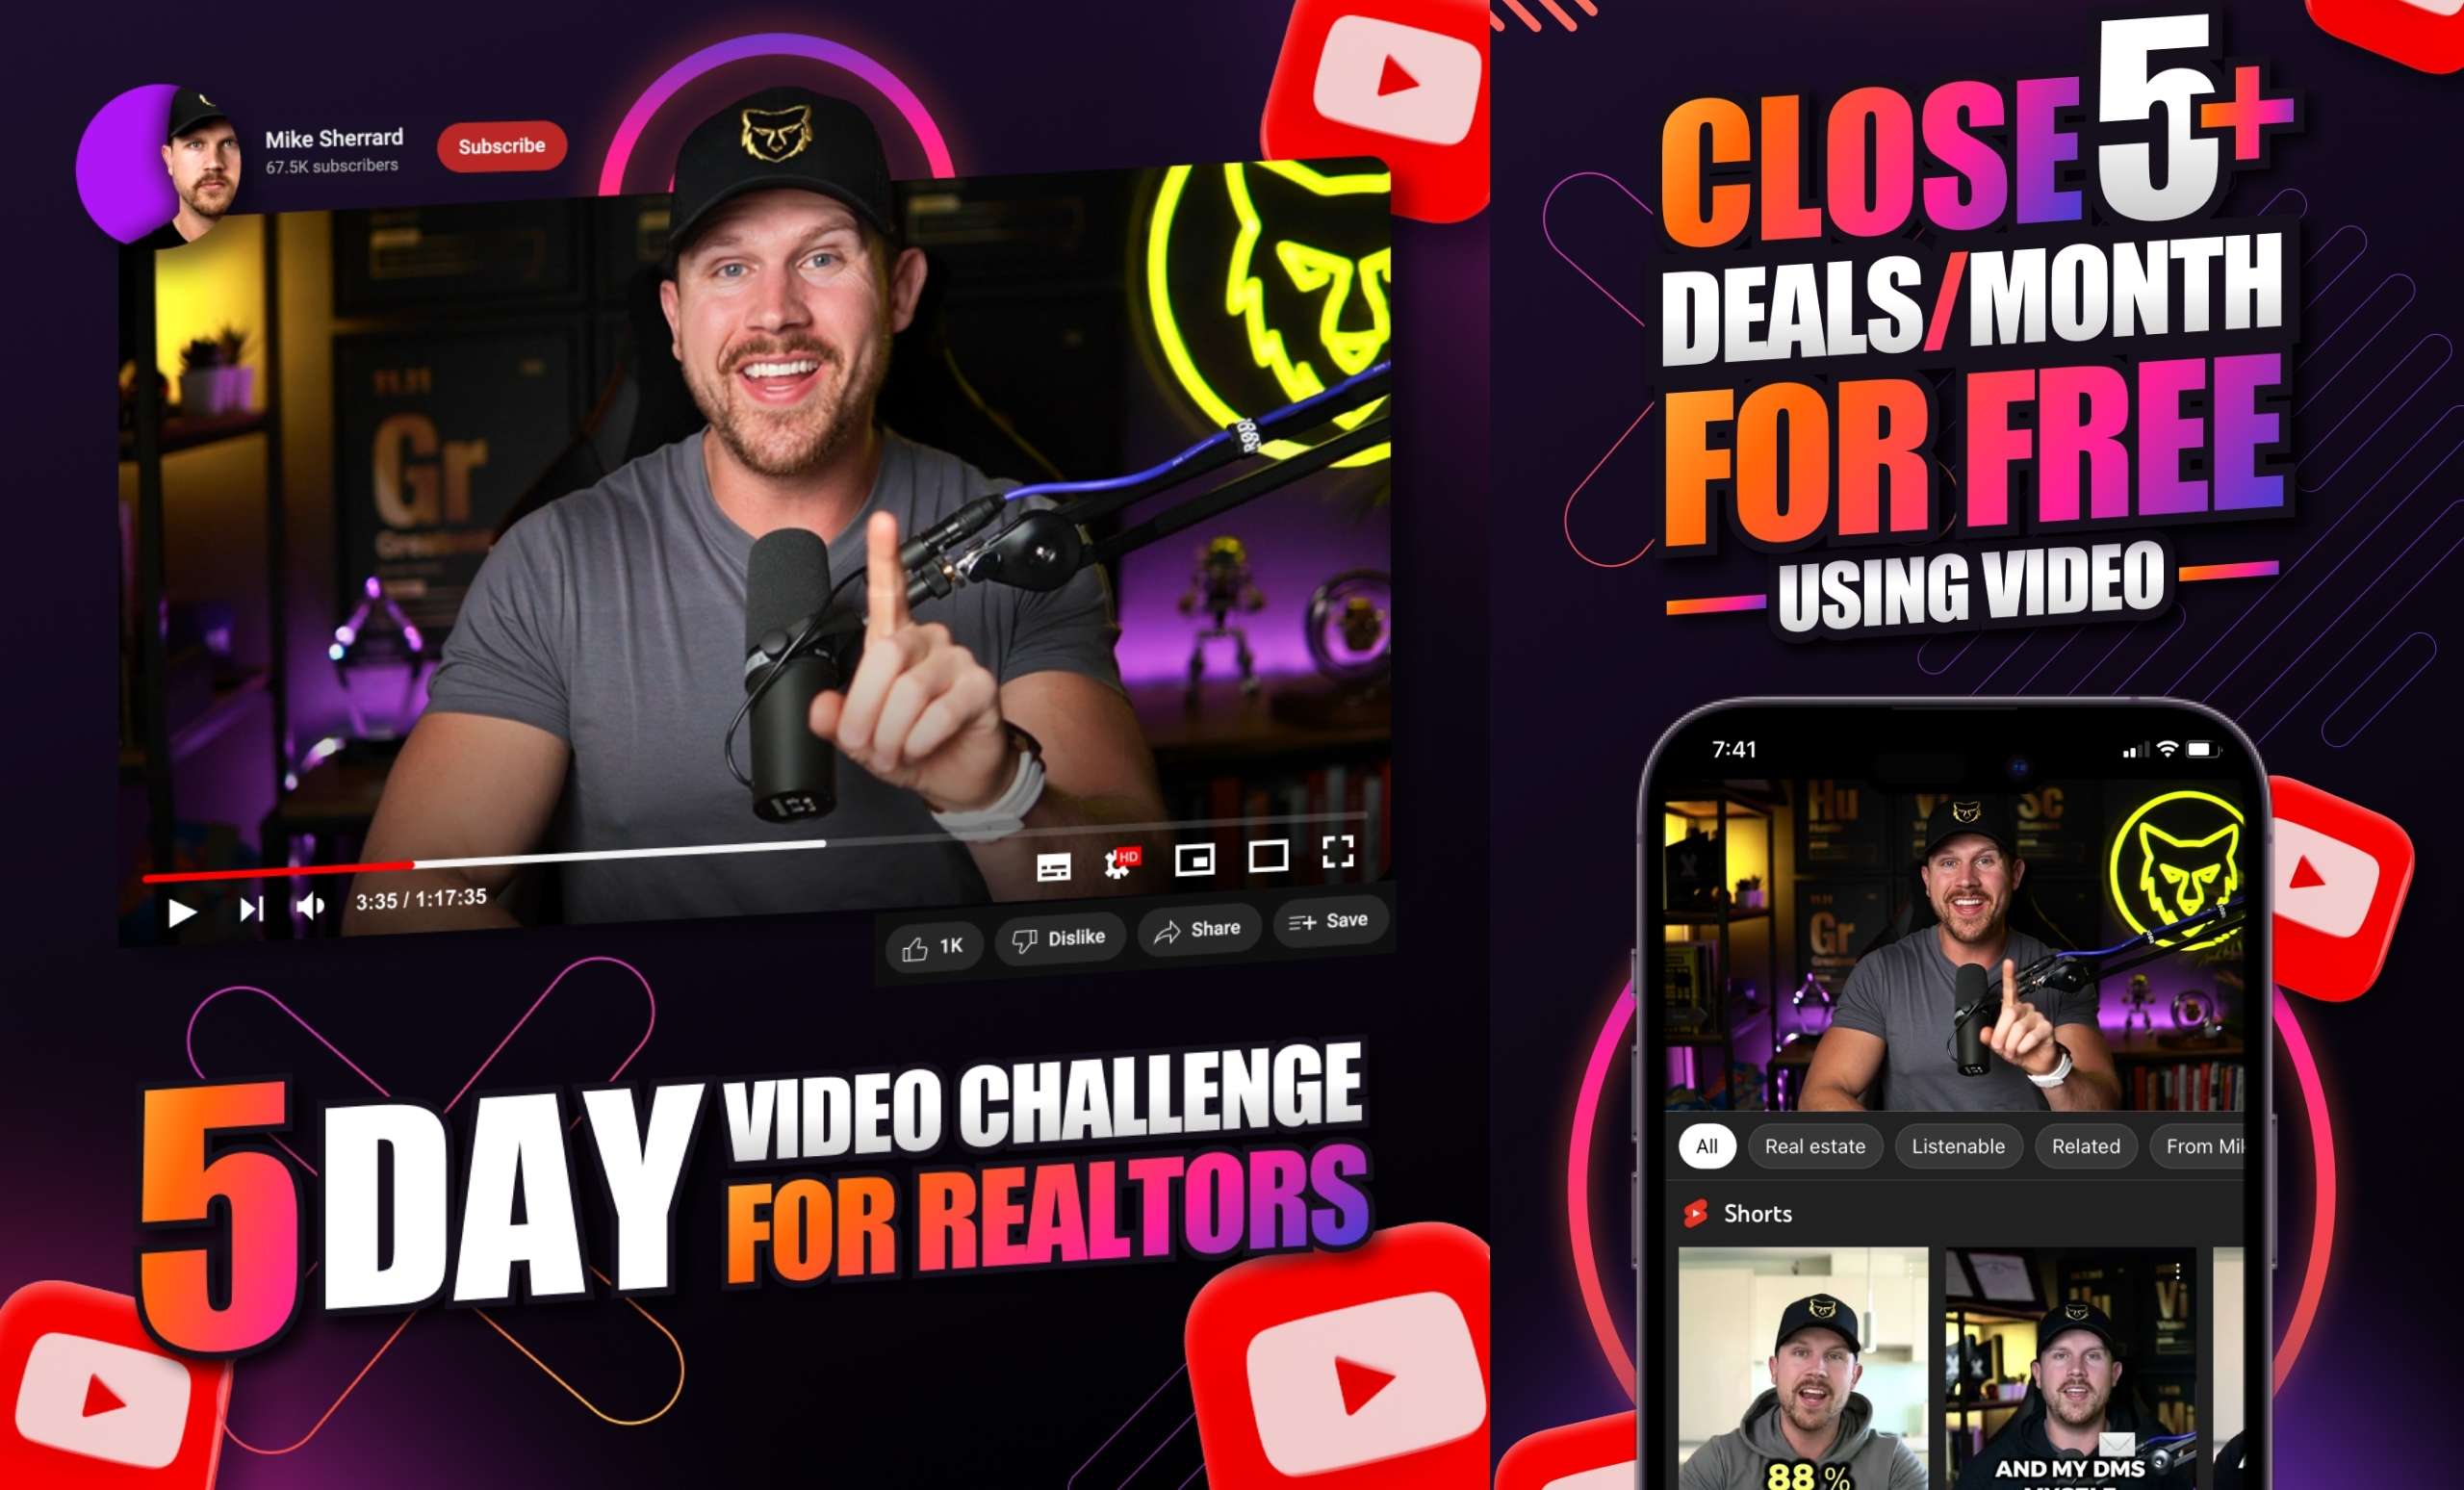 photo of Mike Sherrard with his 5 Day Video Challenge